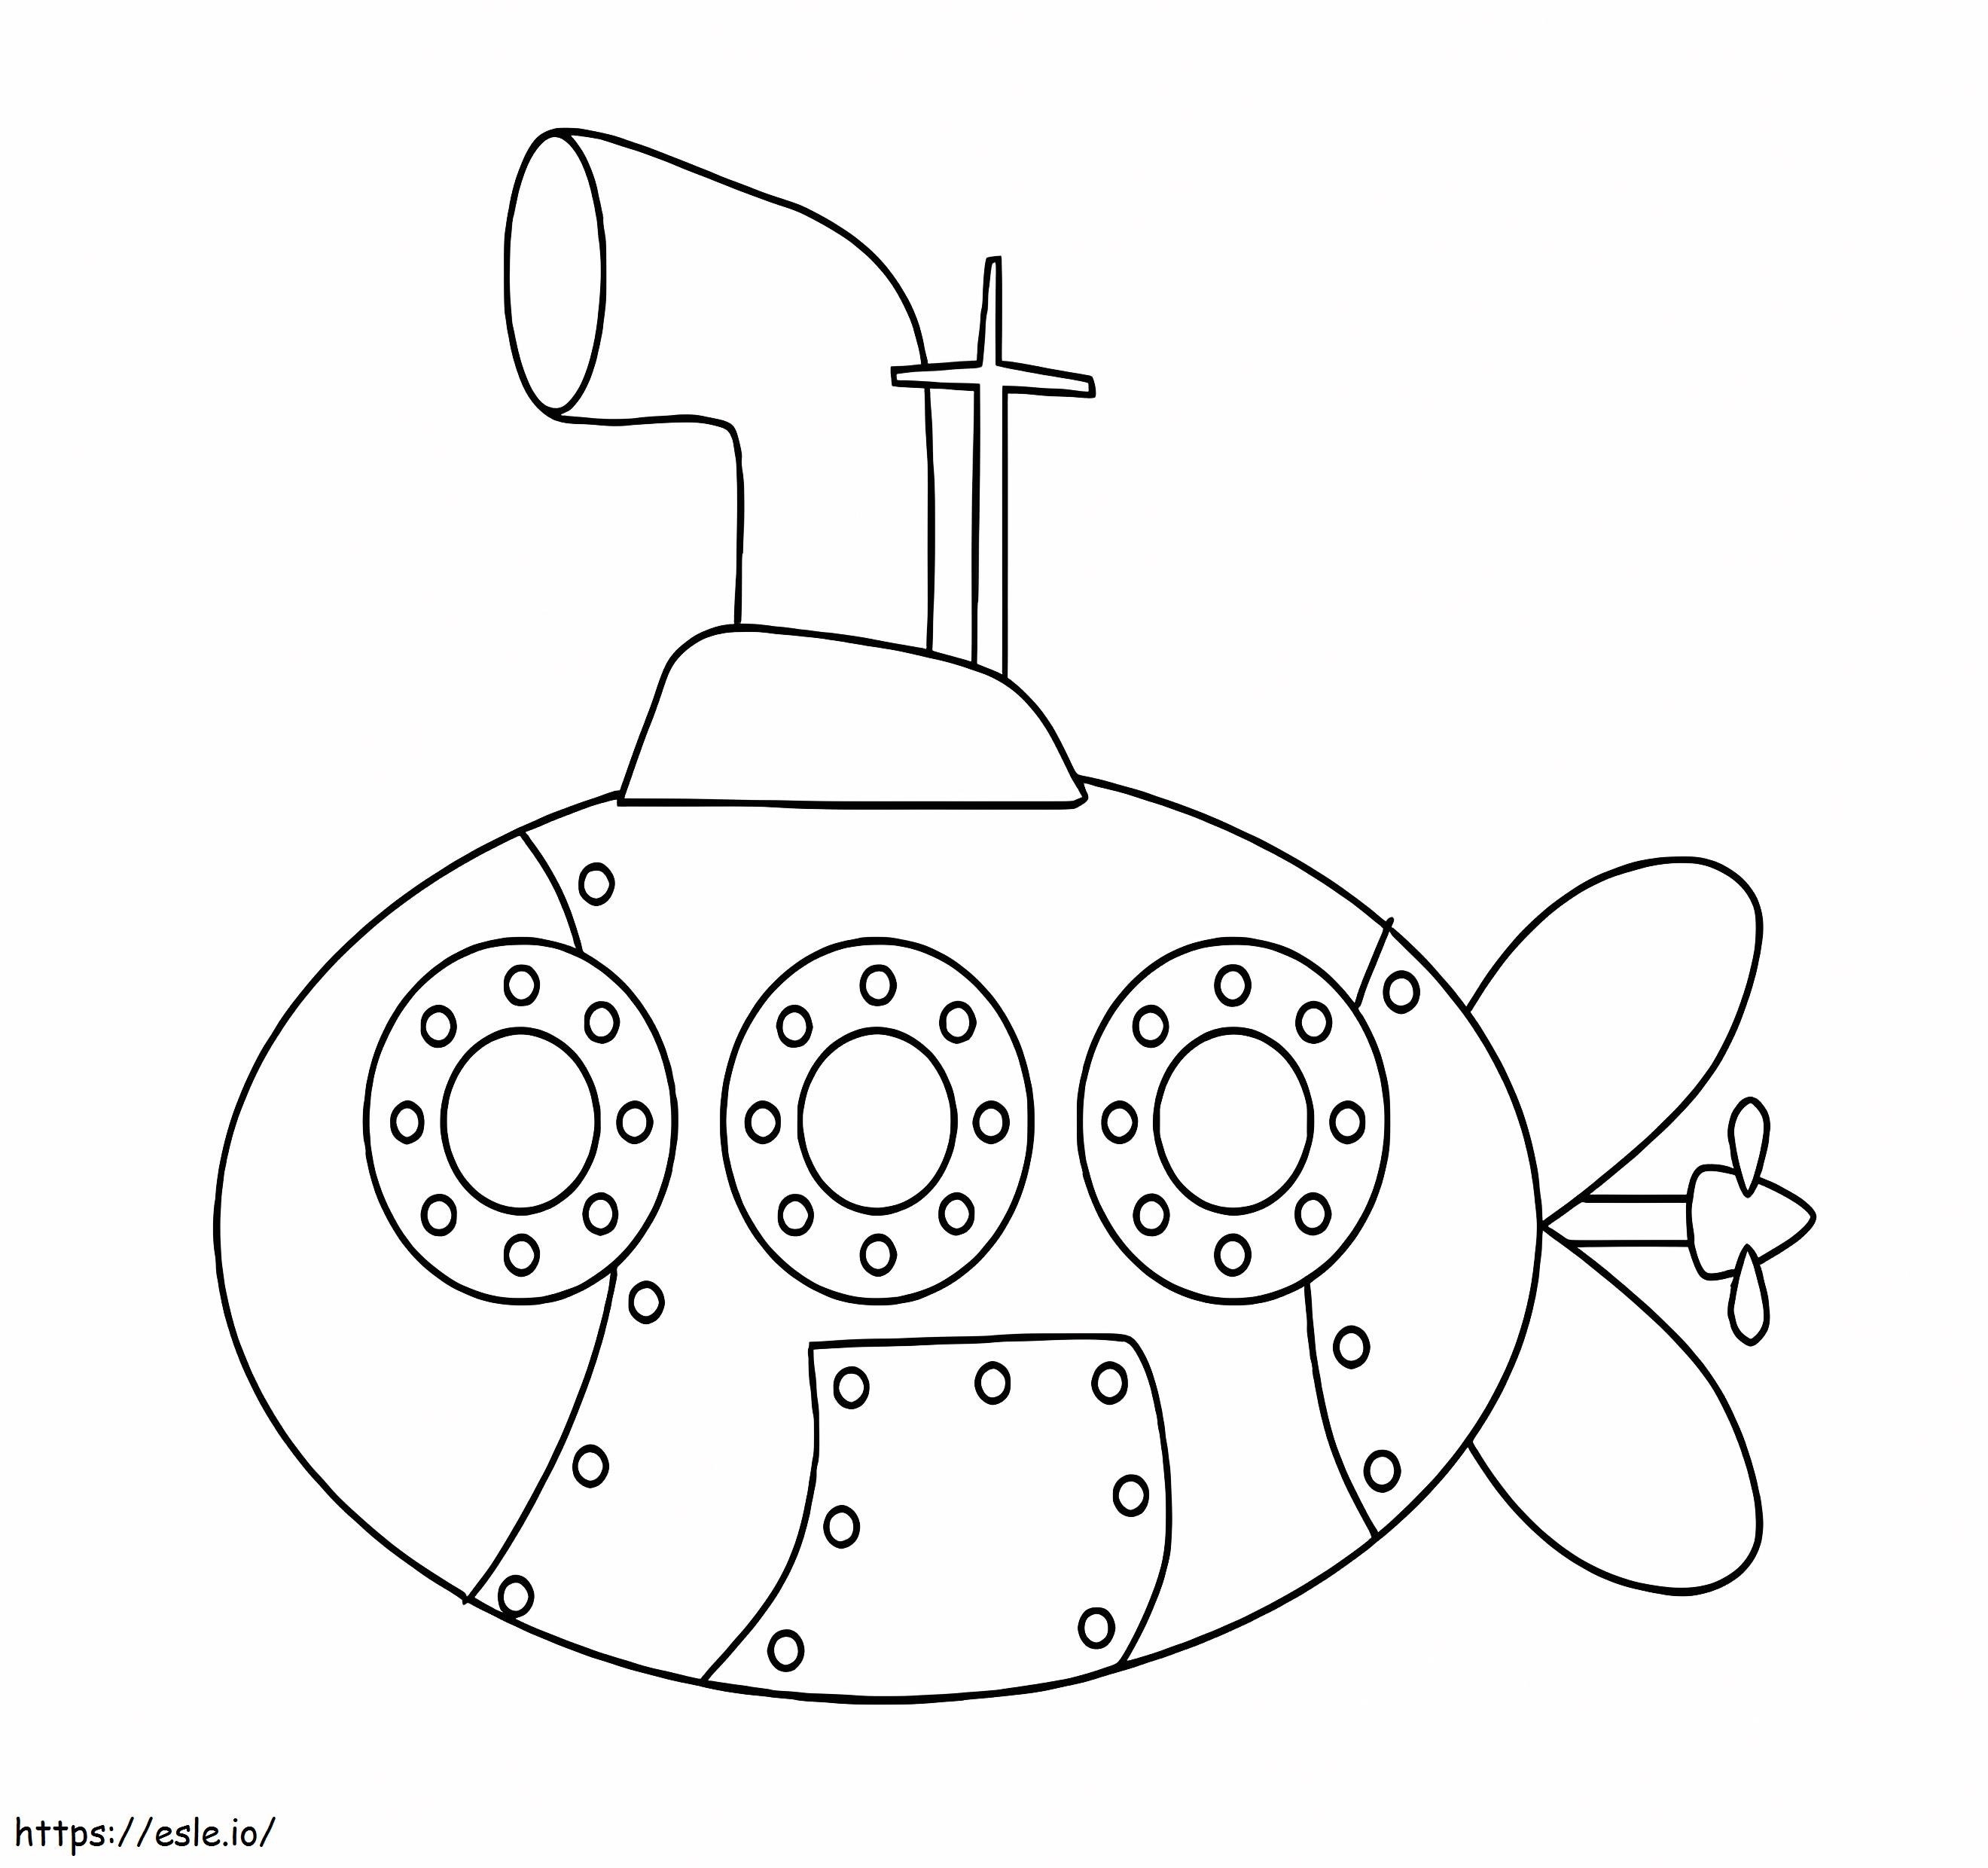 A Magical Submarine coloring page